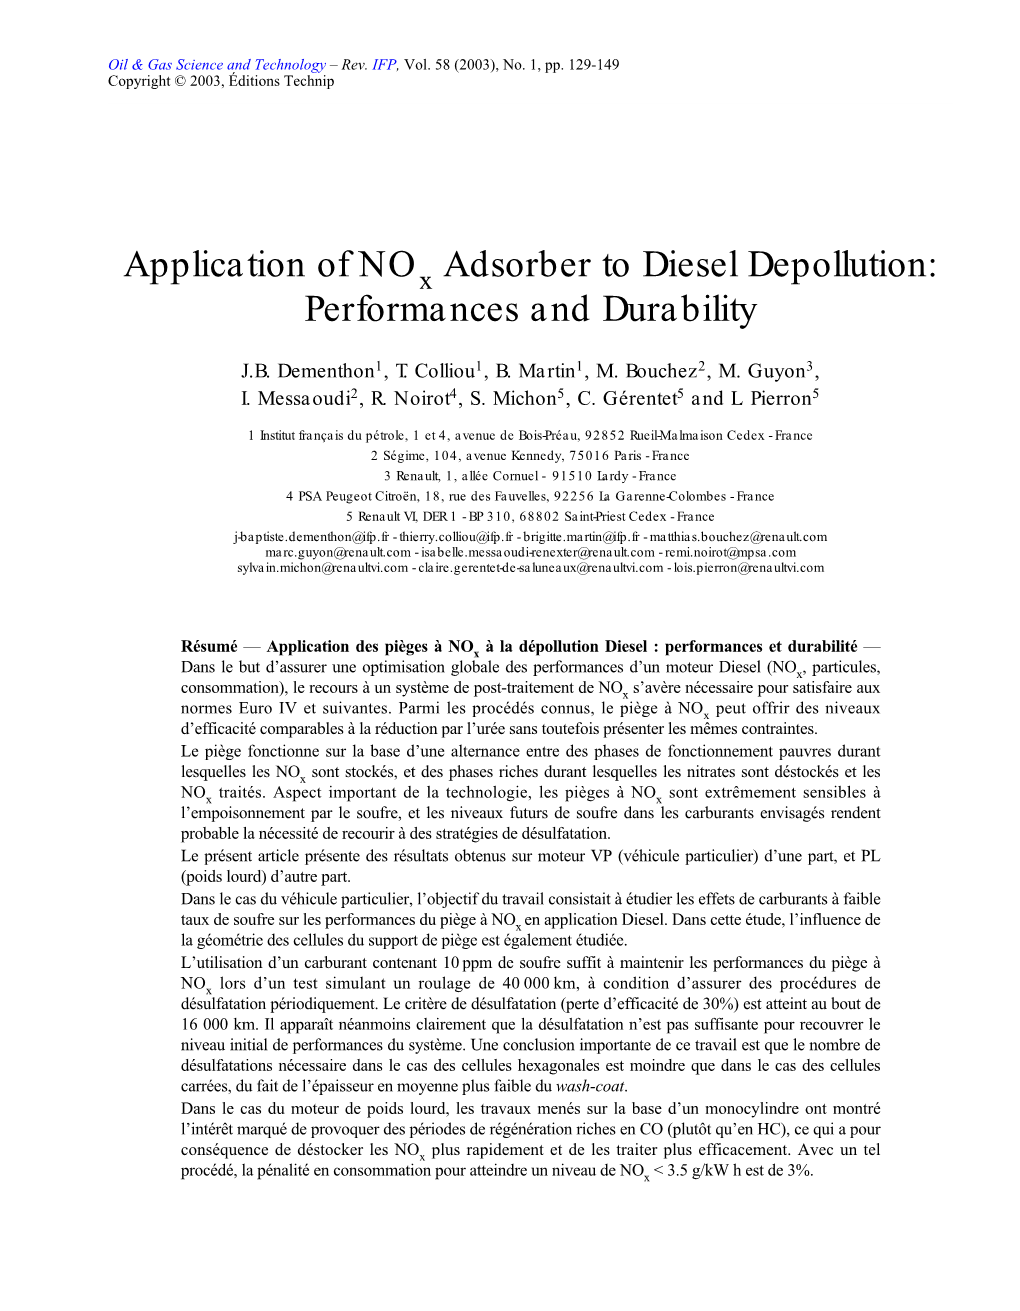 Application of Nox Adsorber to Diesel Depollution: Performances and Durability